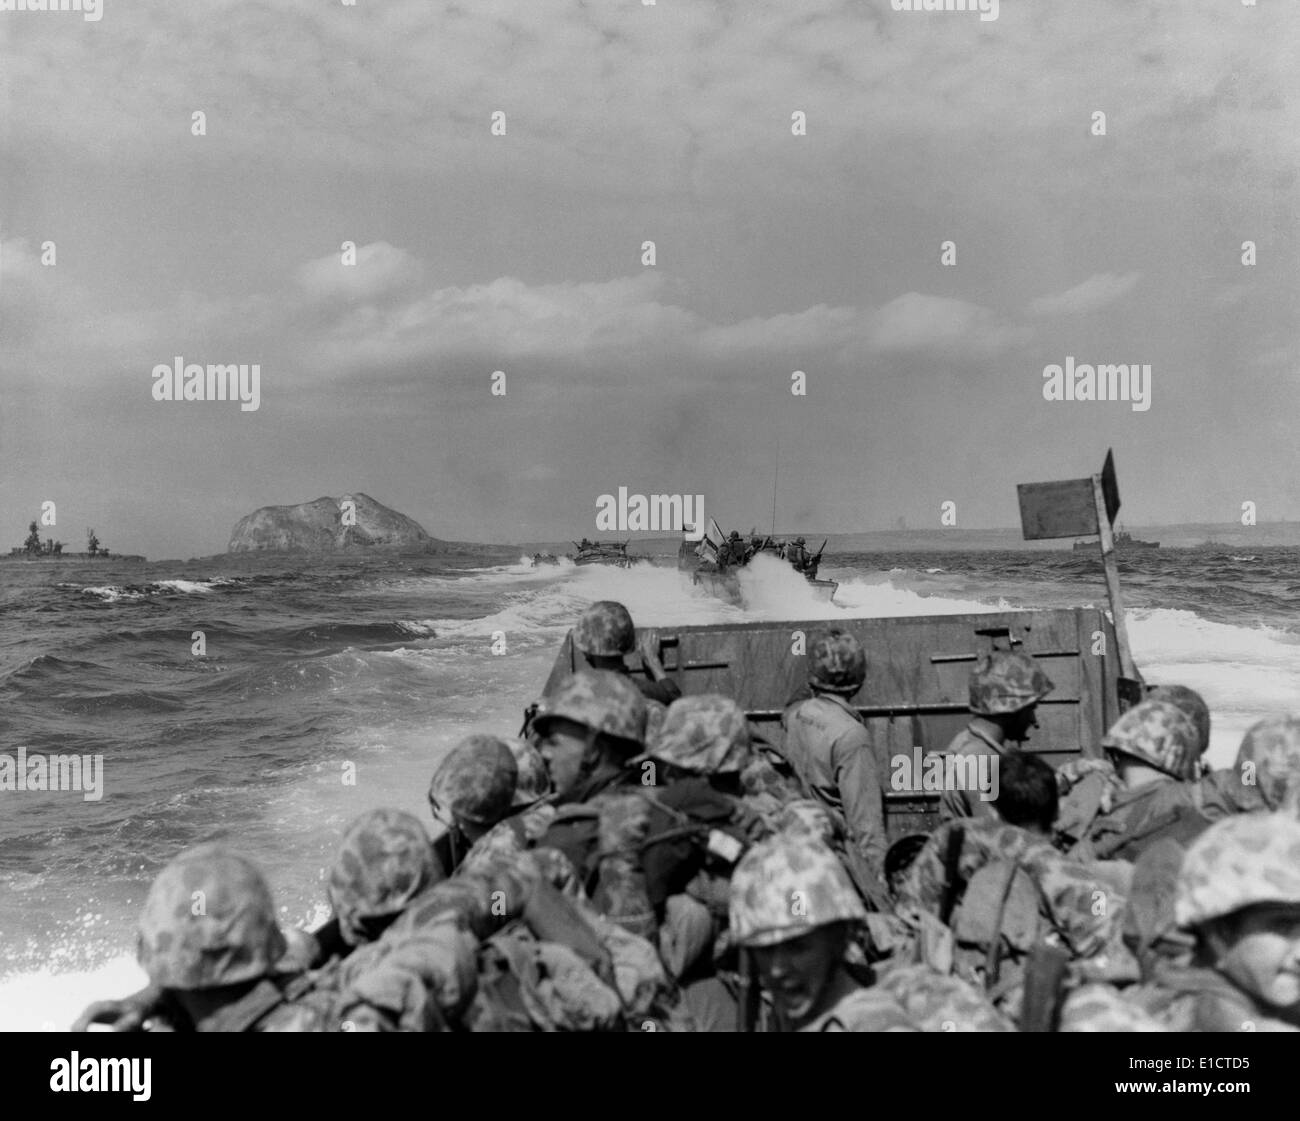 LCVP’s (Landing Craft, Vehicle, Personnel -LCVP) or Higgins boats, approaching Iwo Jima. In the distance is Mount Suribachi. Stock Photo